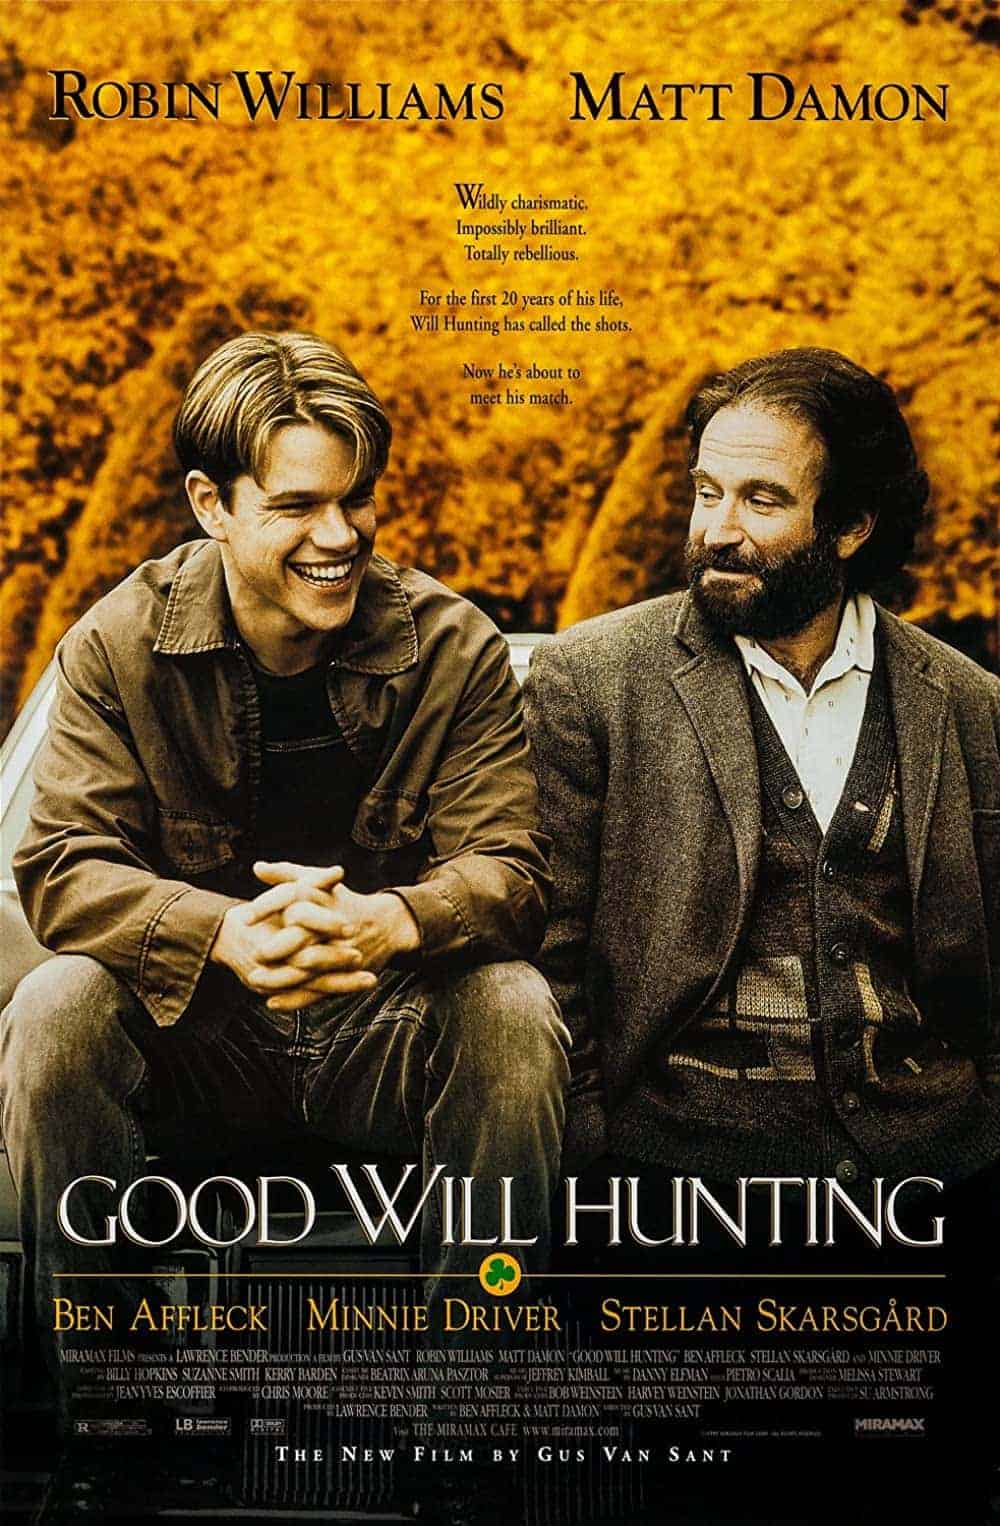 Good Will Hunting (1997) Best Math Movies to Add in Your Watchlist